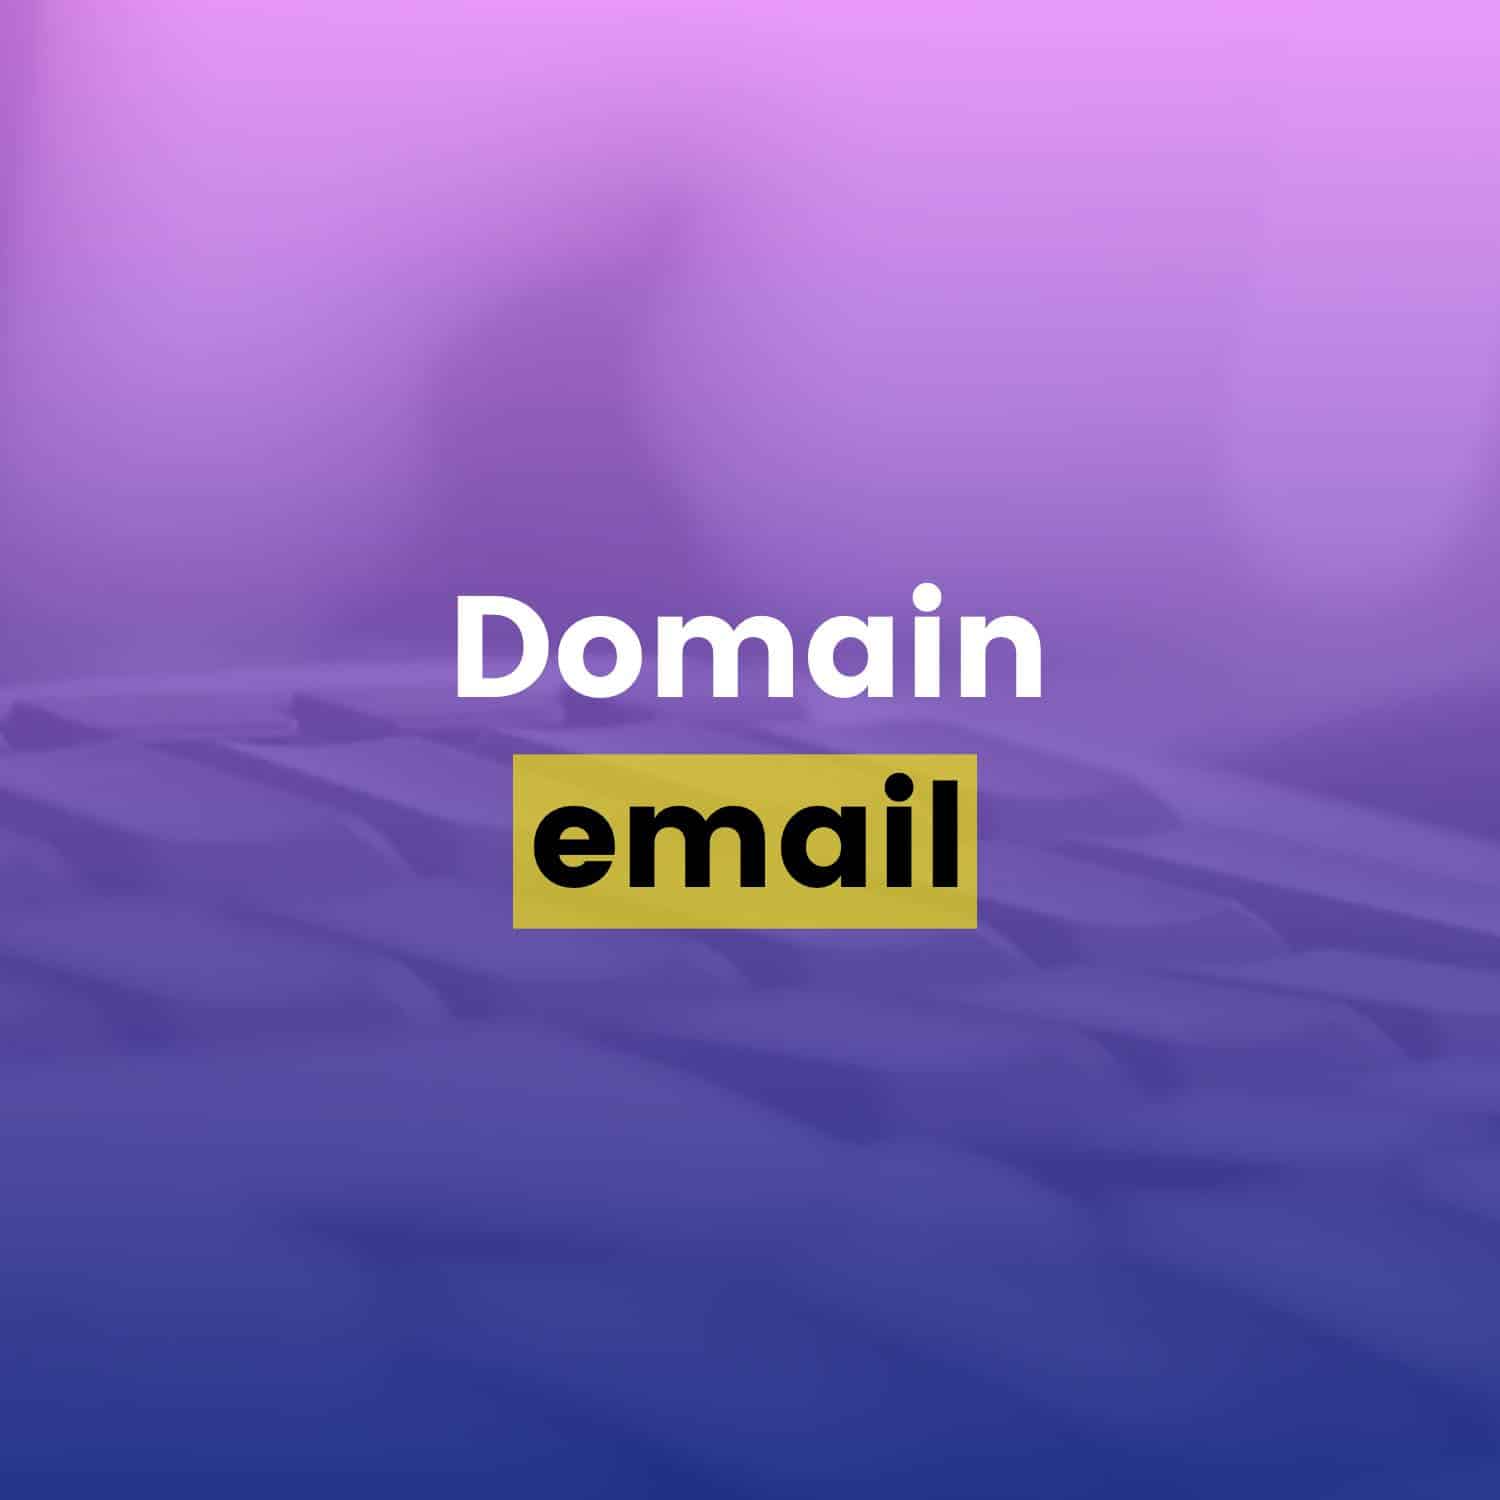 drip-email-templates-domain-email